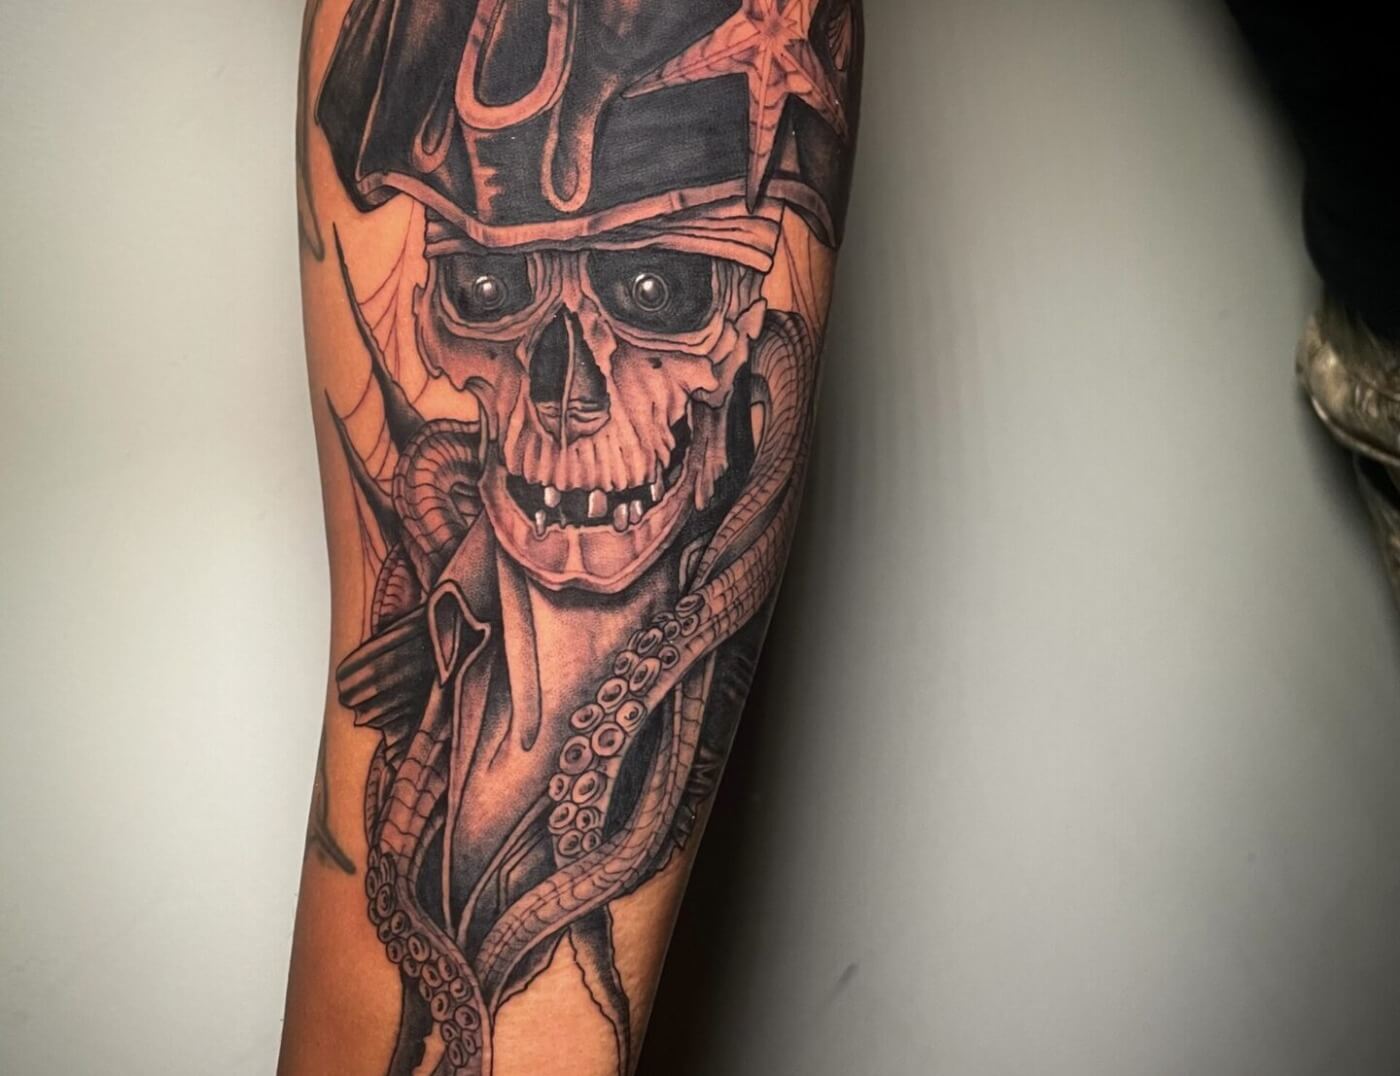 Dead Pirate or Dead Colonial soldier? What do you think? Surreal Photo-realism tattoo by Lyric The Artist at Iron Palm Tattoos In Downtown Atlanta. Call 404-973-7828 or stop by for a free consultation. Walk-Ins are always welcome.